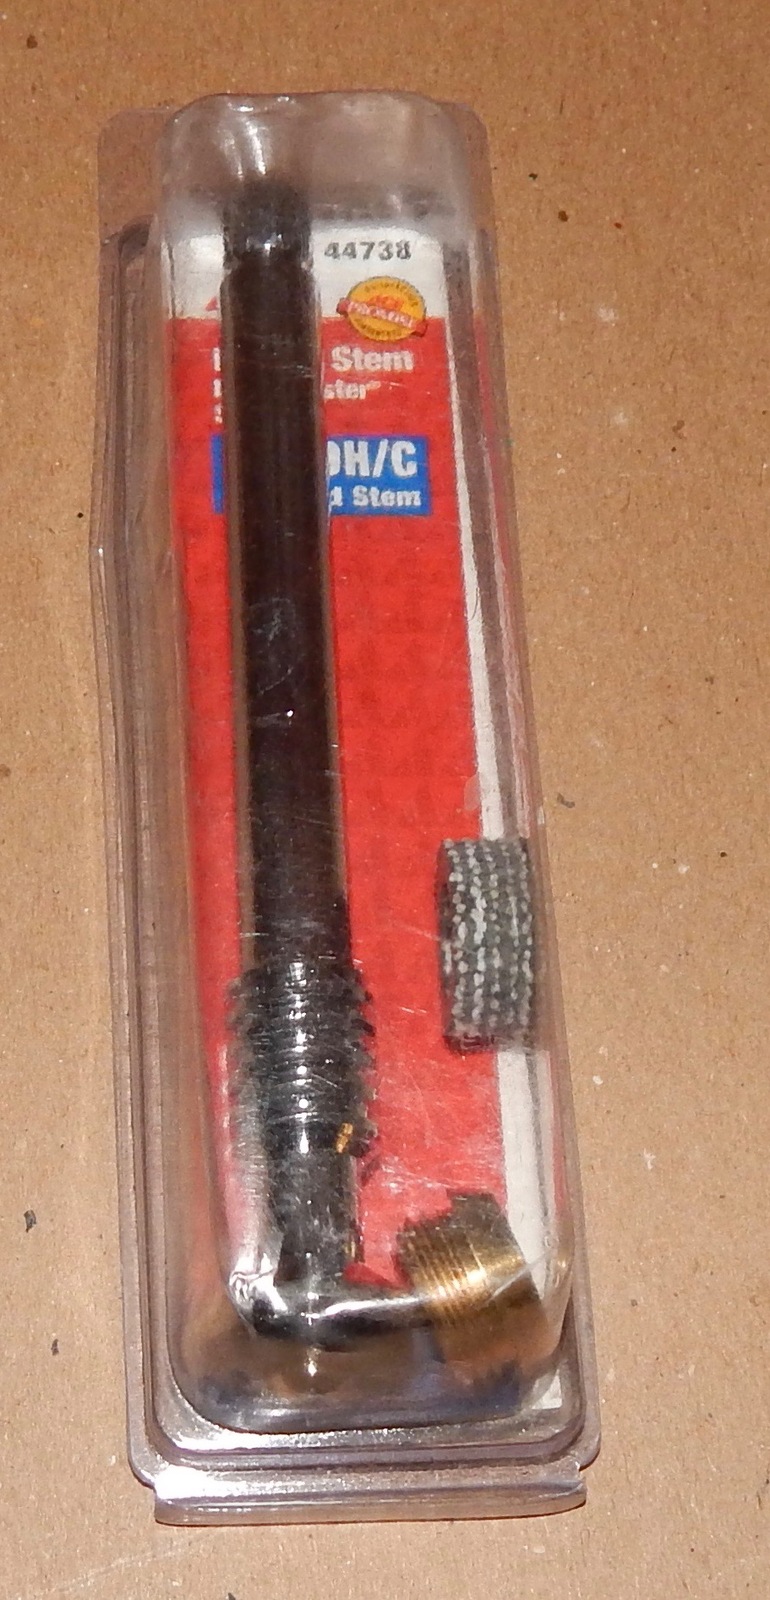 Faucet Stem NIB Ace Hardware 44738 Price Pfister Style 1OI-9H/C Hot/Cold  96X - $6.89